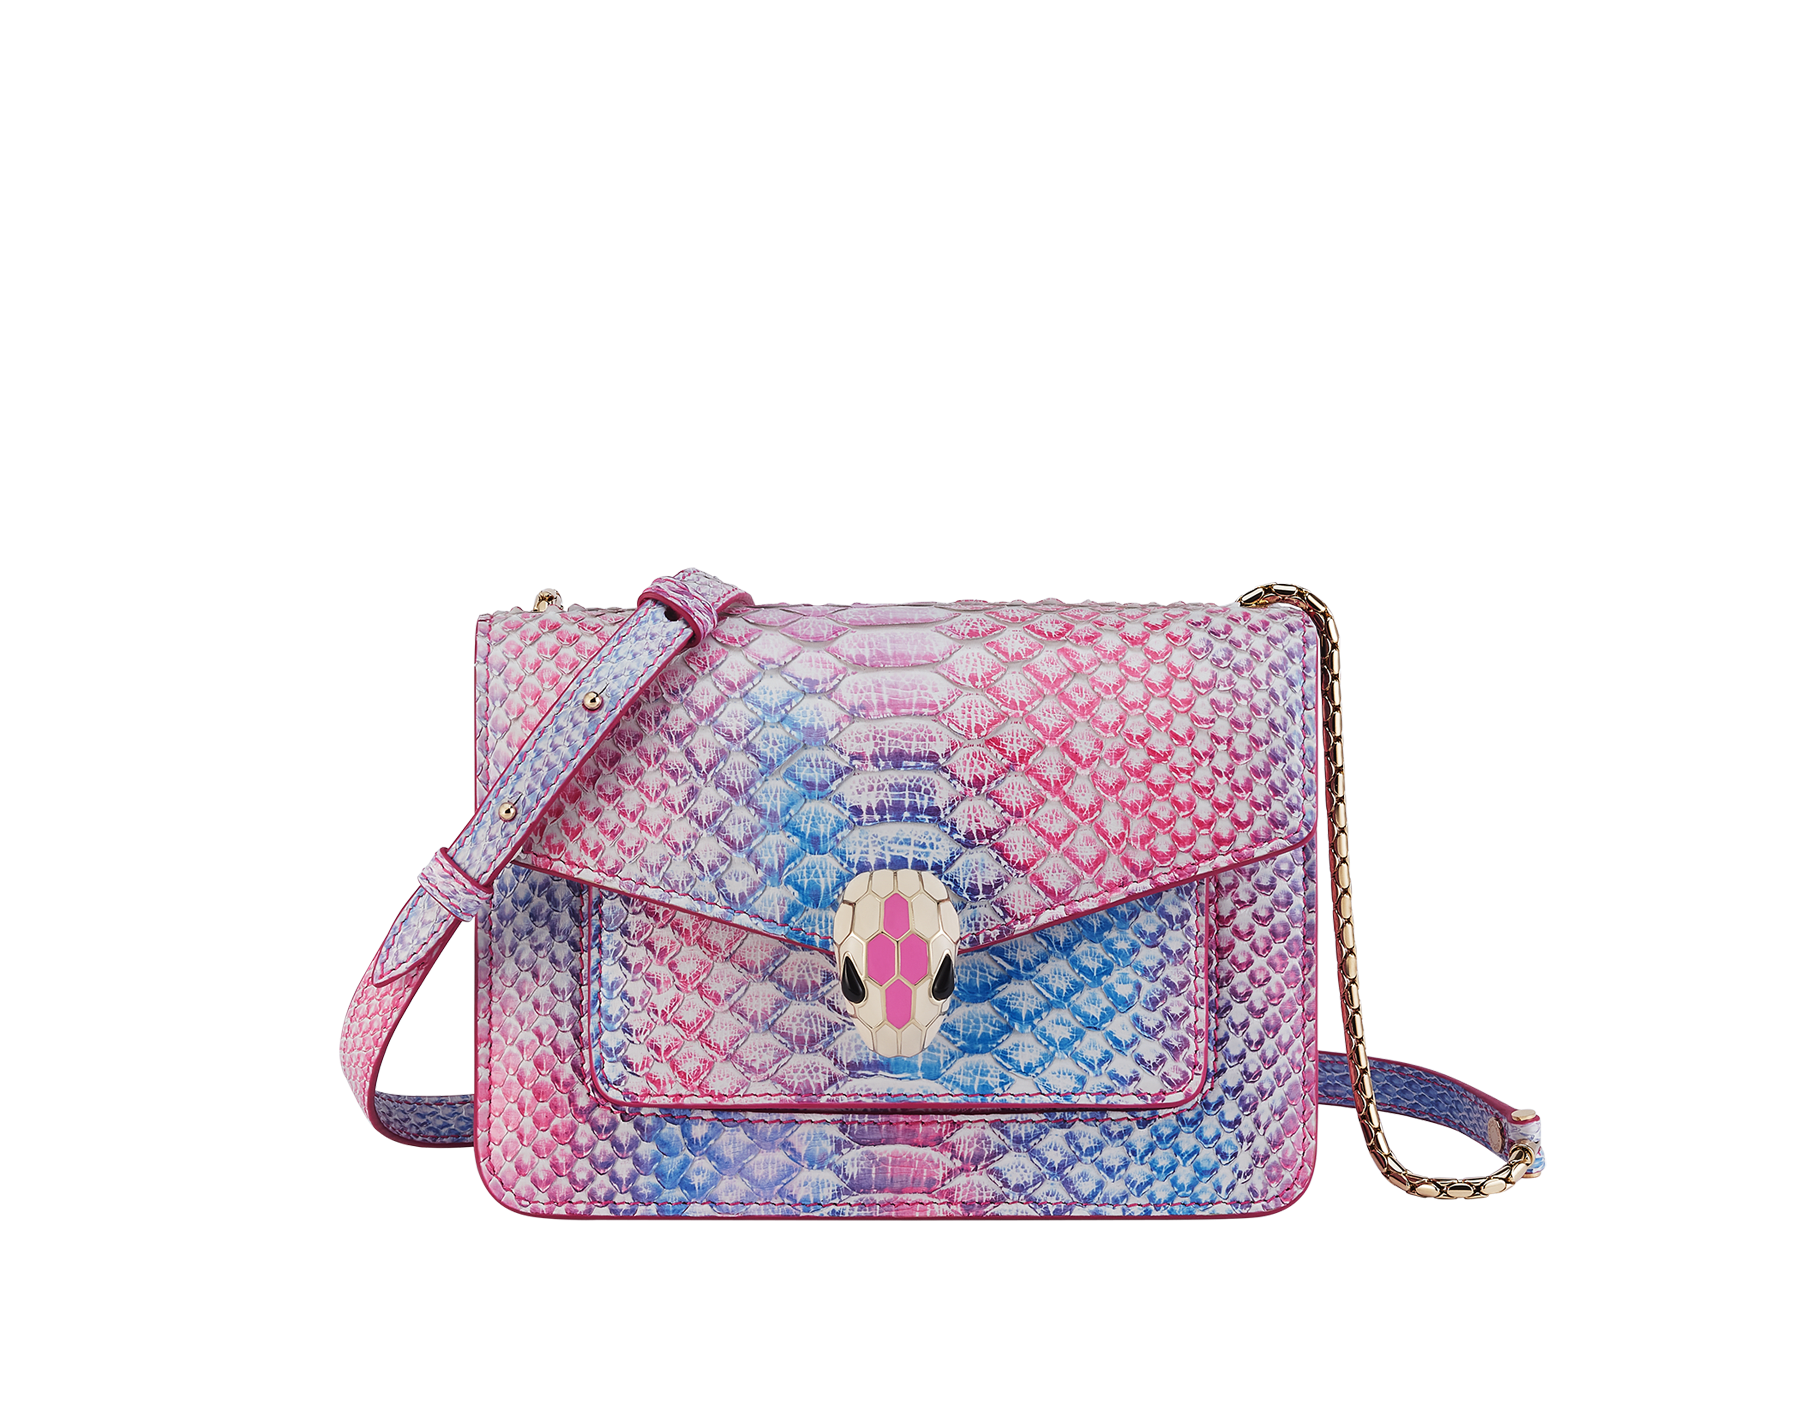 Serpenti Forever small crossbody bag in multicolour Spring Shade python skin with azalea quartz pink nappa leather lining. Captivating magnetic snakehead closure in light gold-plated brass embellished with ivory opal and azalea quartz pink enamel scales and black onyx eyes. 292138 image 1